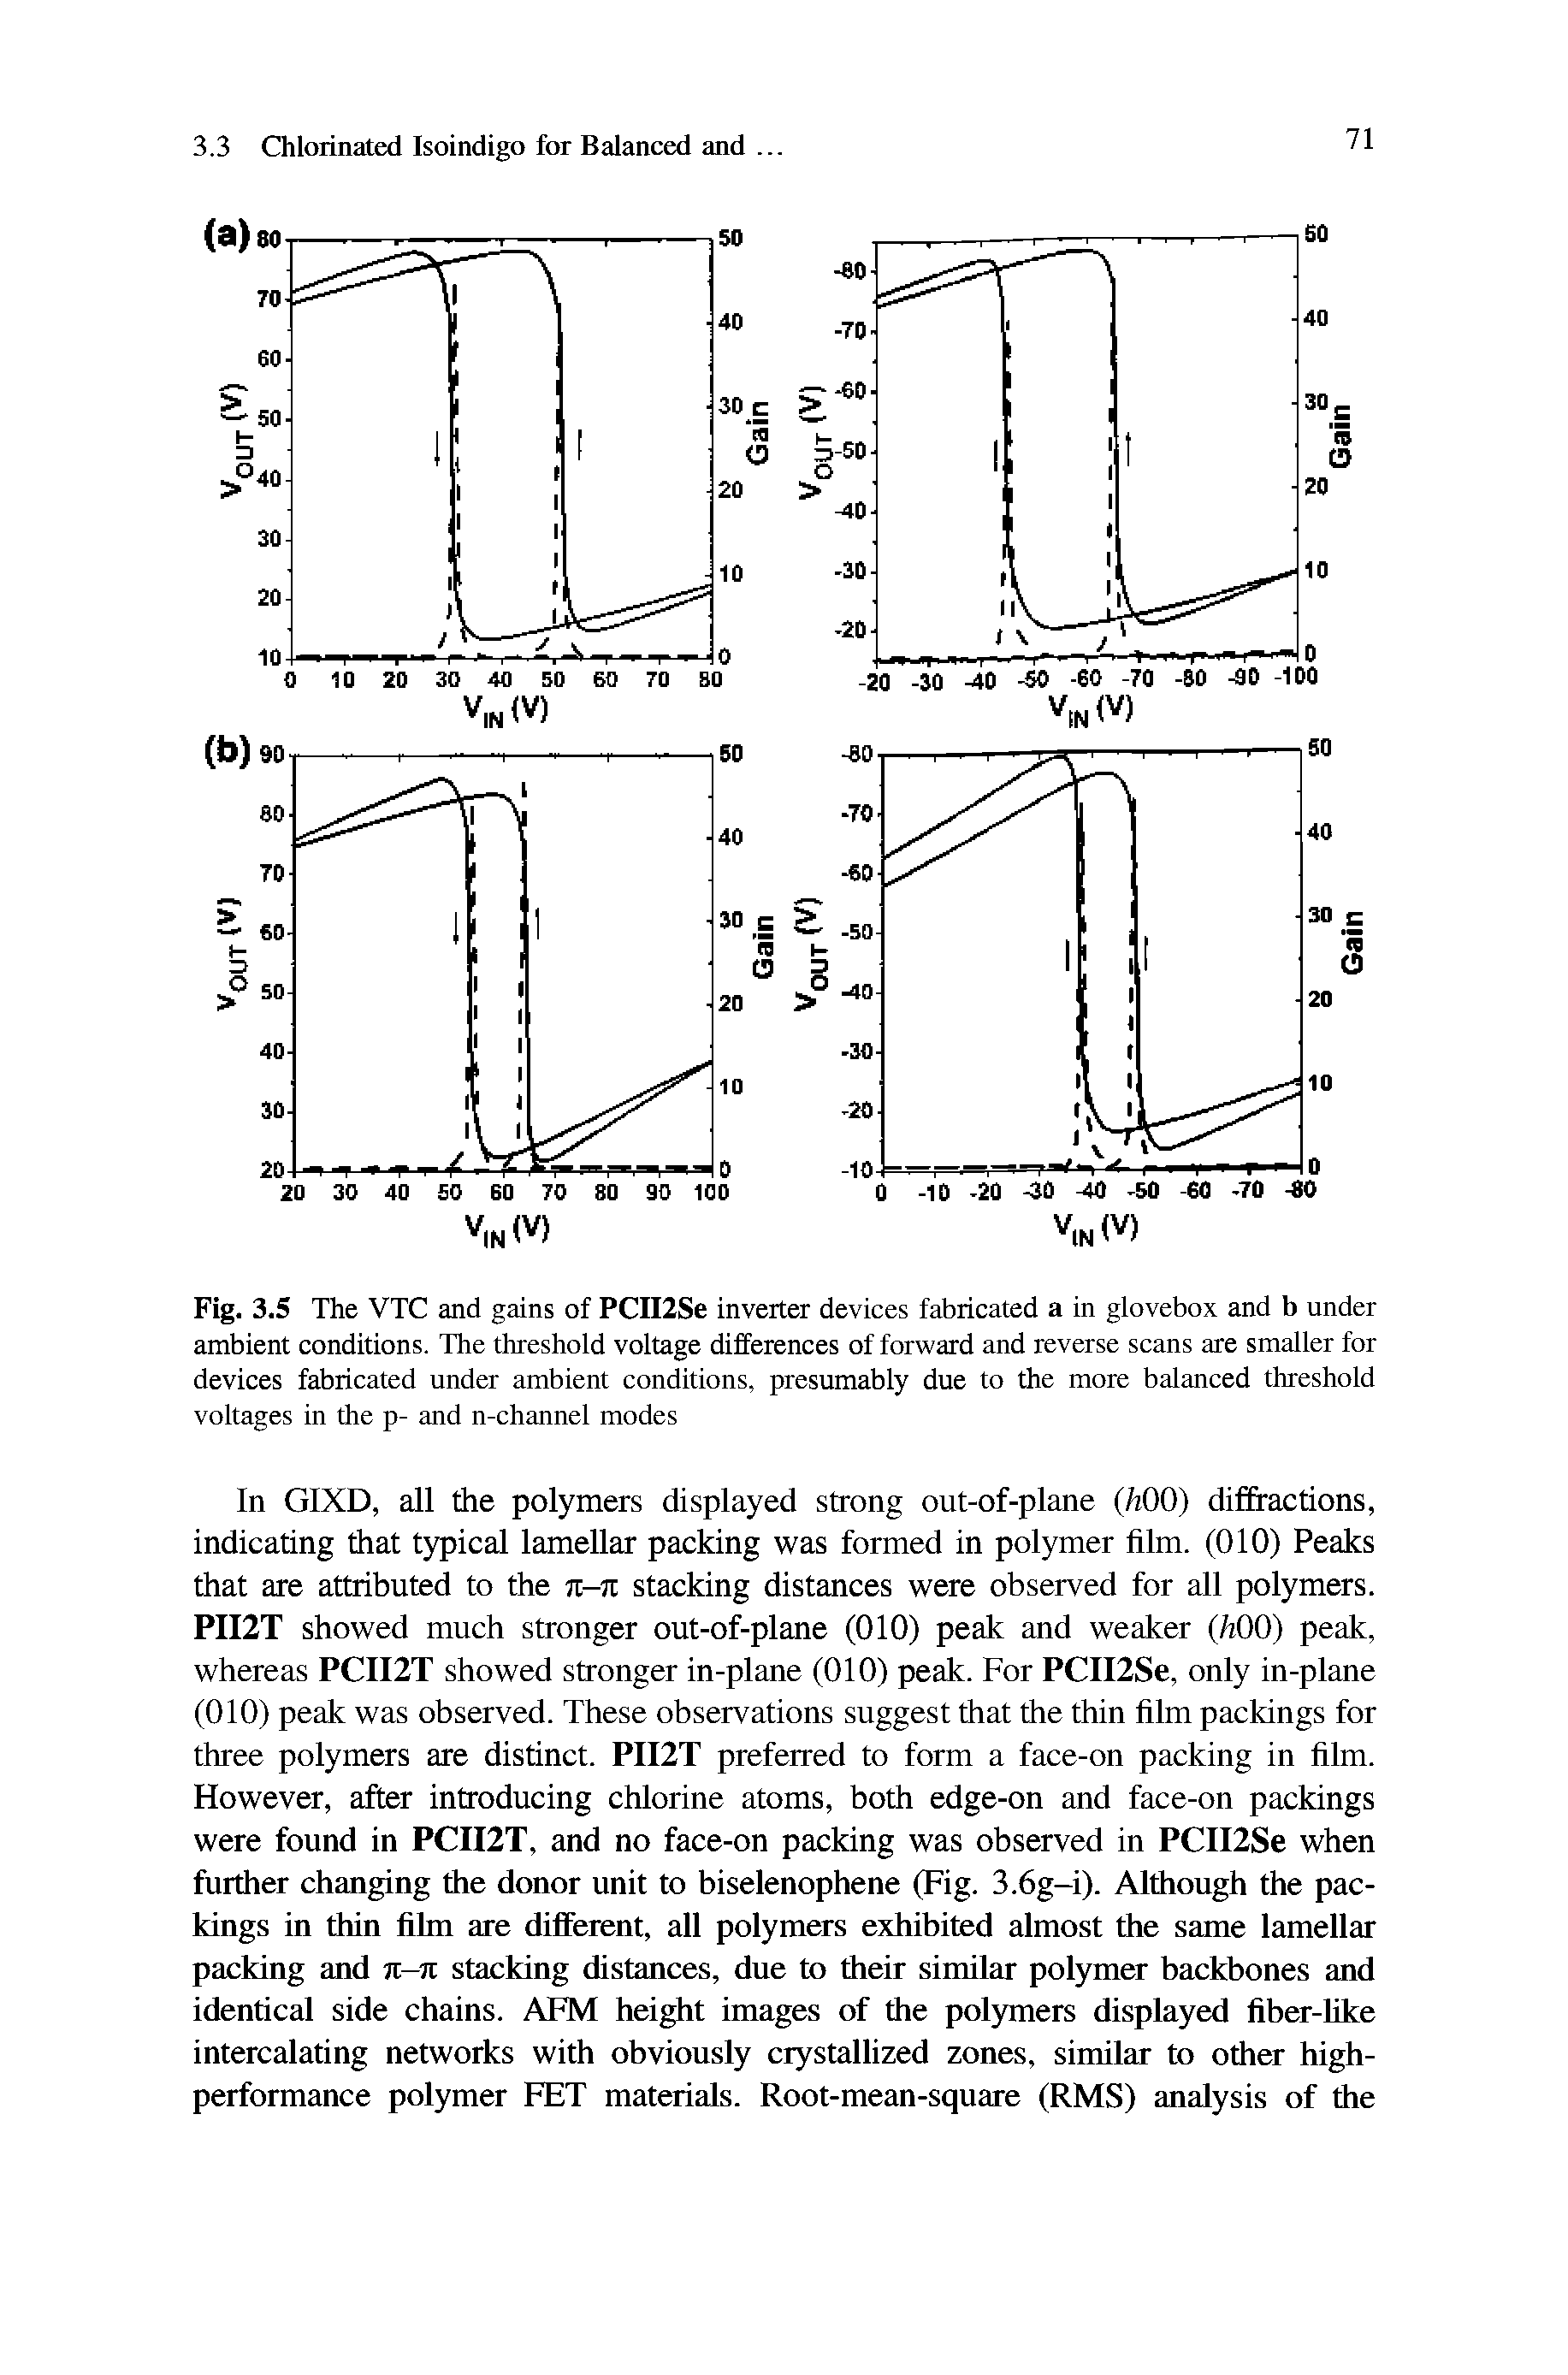 Fig. 3.5 The VTC and gains of PCIIlSe inverter devices fabricated a in glovebox and b under ambient conditions. The threshold voltage differences of forward and reverse scans are smaller for devices fabricated under ambient conditions, presumably due to the more balanced threshold voltages in the p- and n-channel modes...